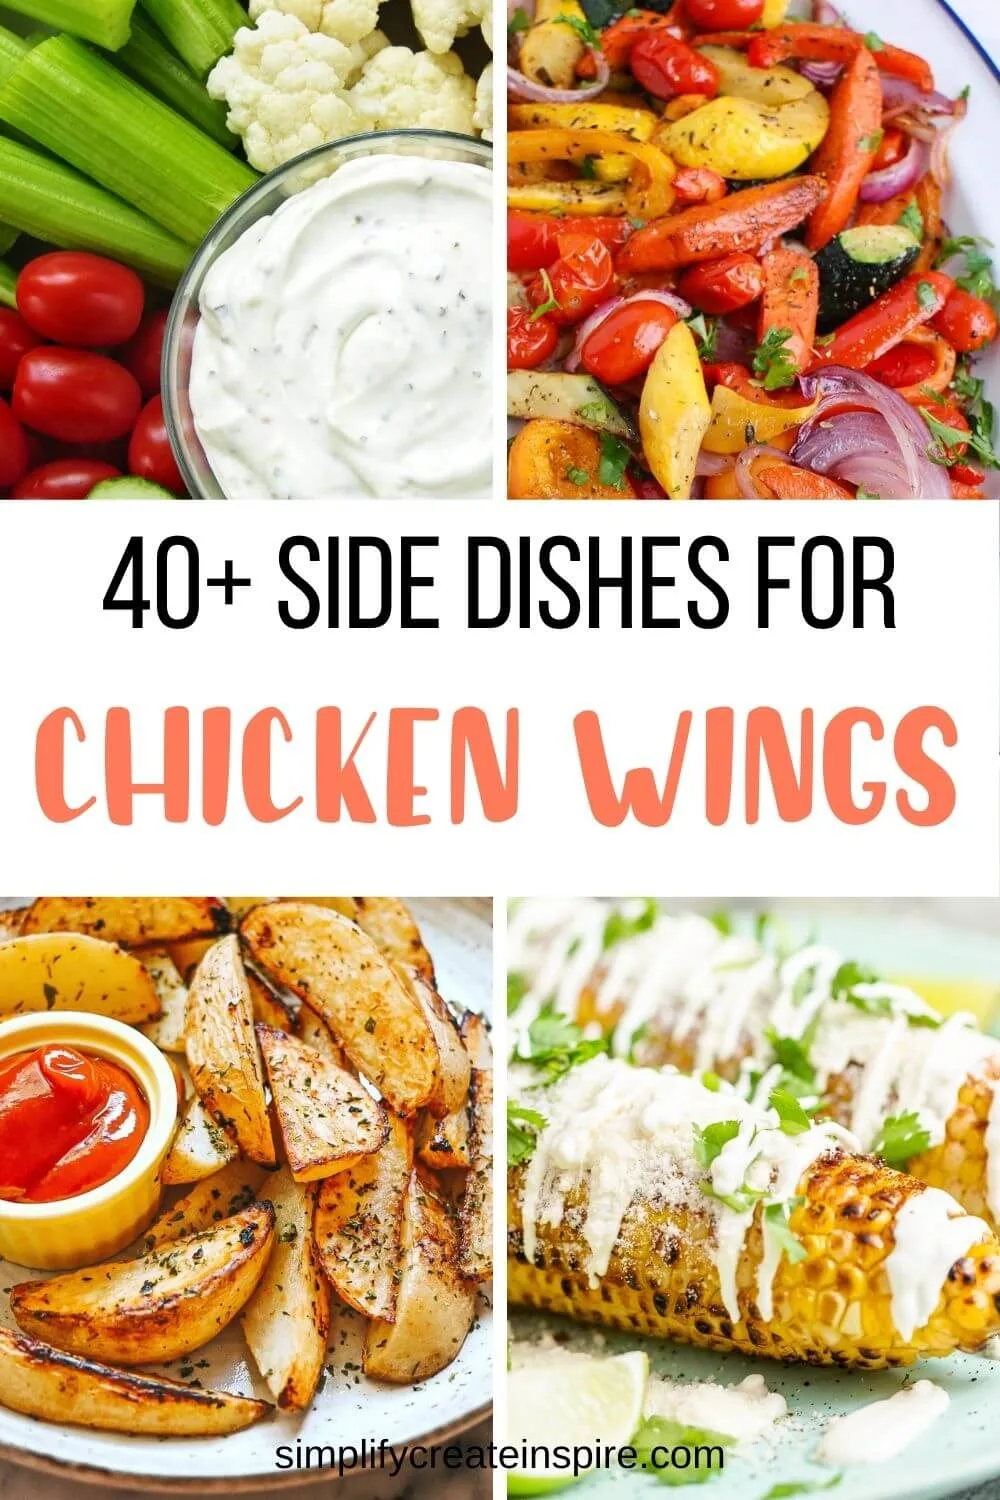 Best side dishes for chicken wings